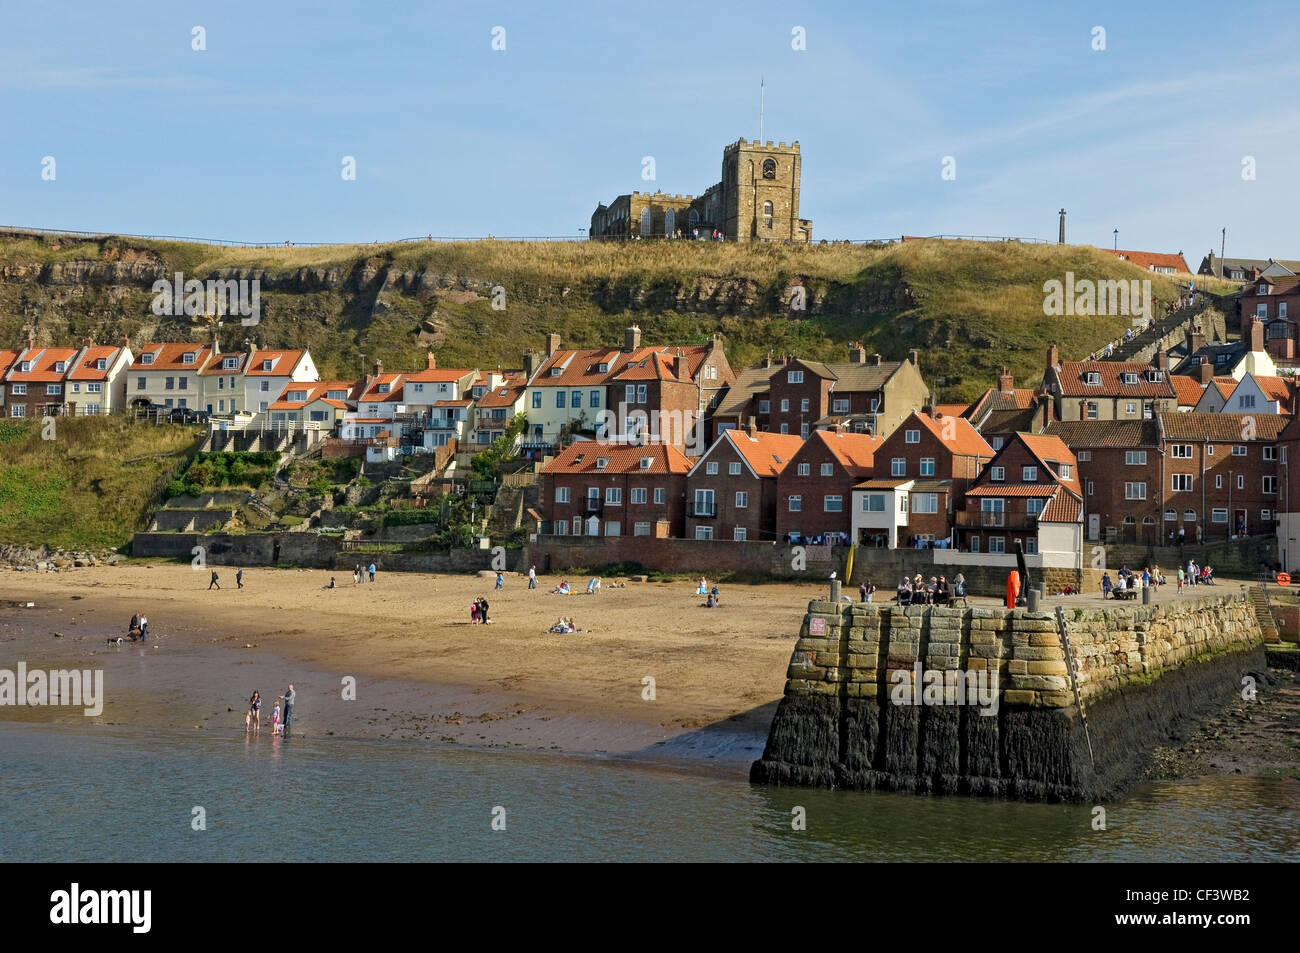 St Mary's church on the hilltop overlooking the old harbour. Stock Photo